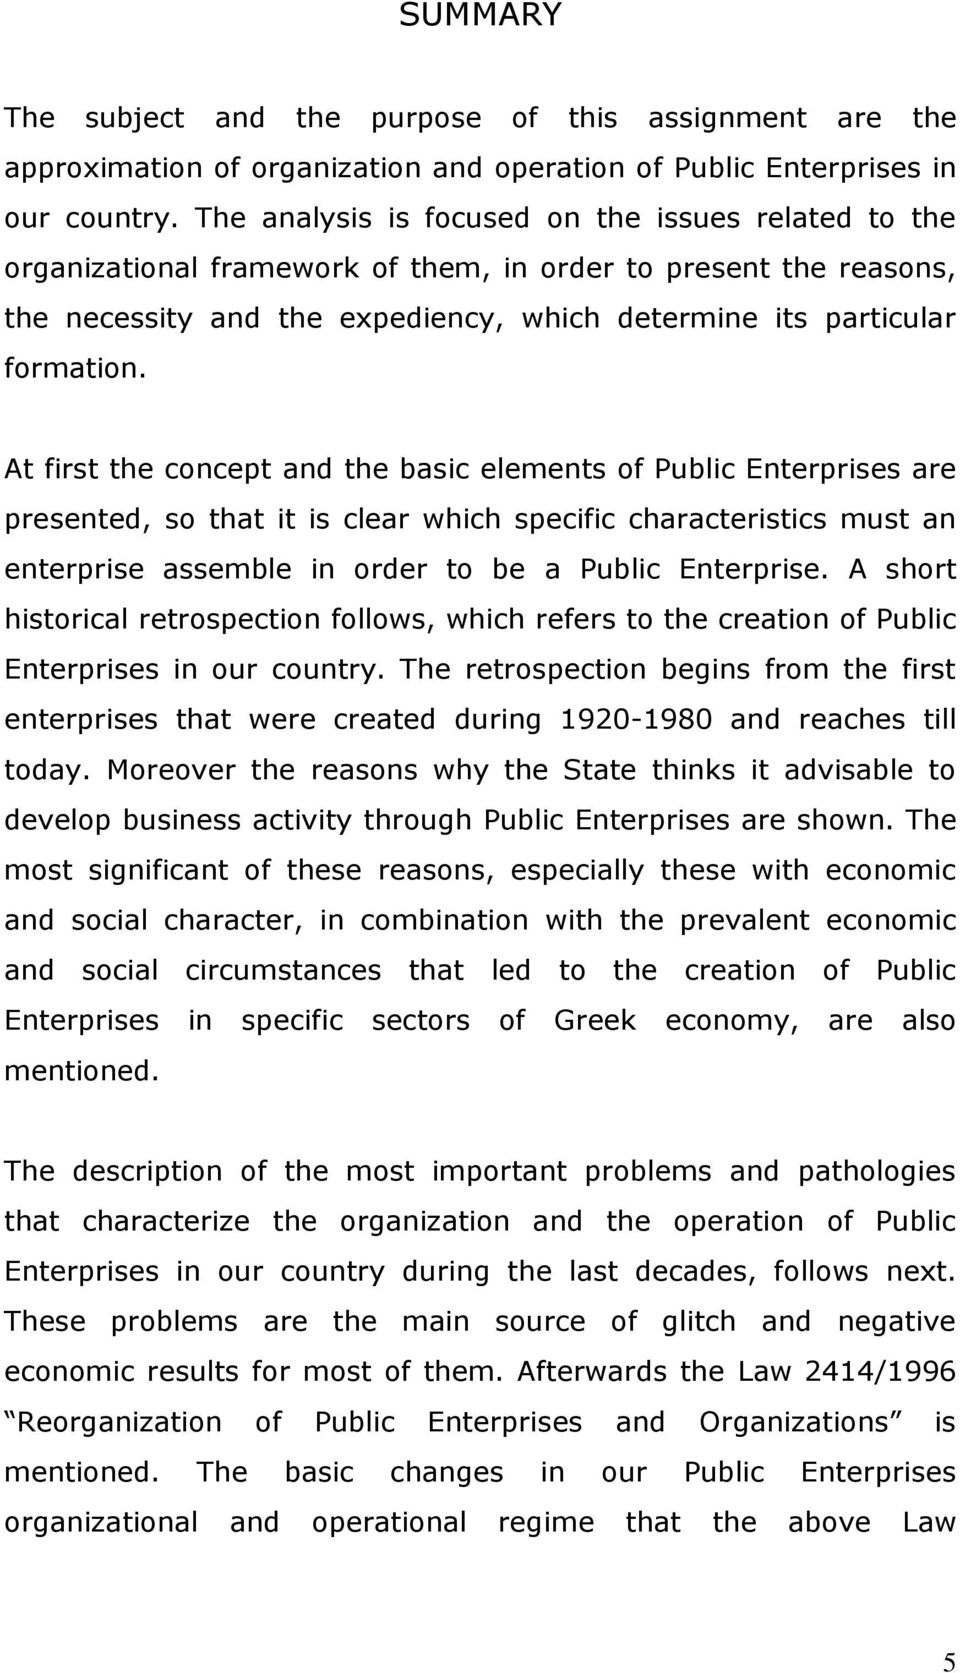 At first the concept and the basic elements of Public Enterprises are presented, so that it is clear which specific characteristics must an enterprise assemble in order to be a Public Enterprise.